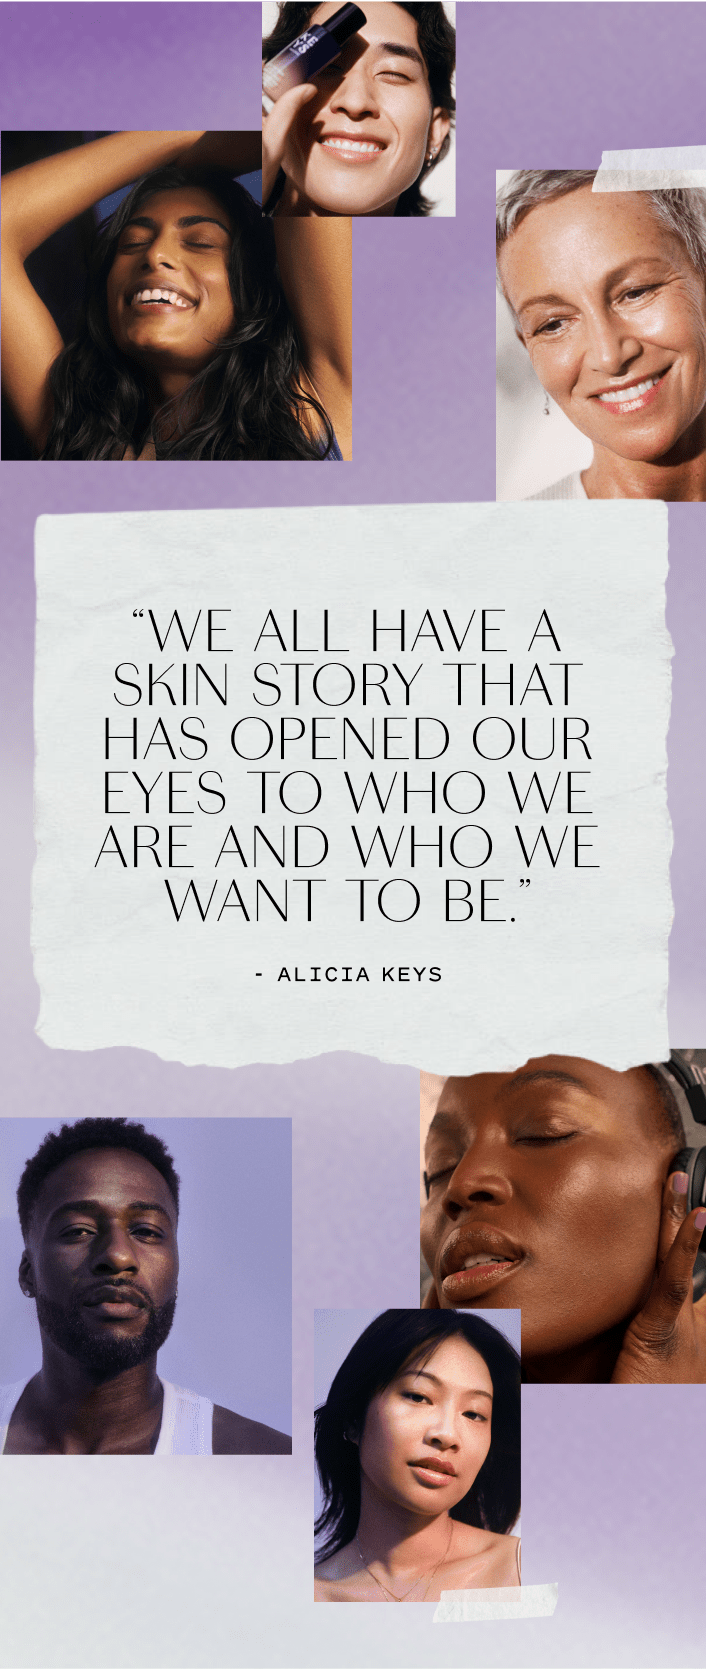 We all have a skin story that has opened our eyes to who we are and who we want to be.